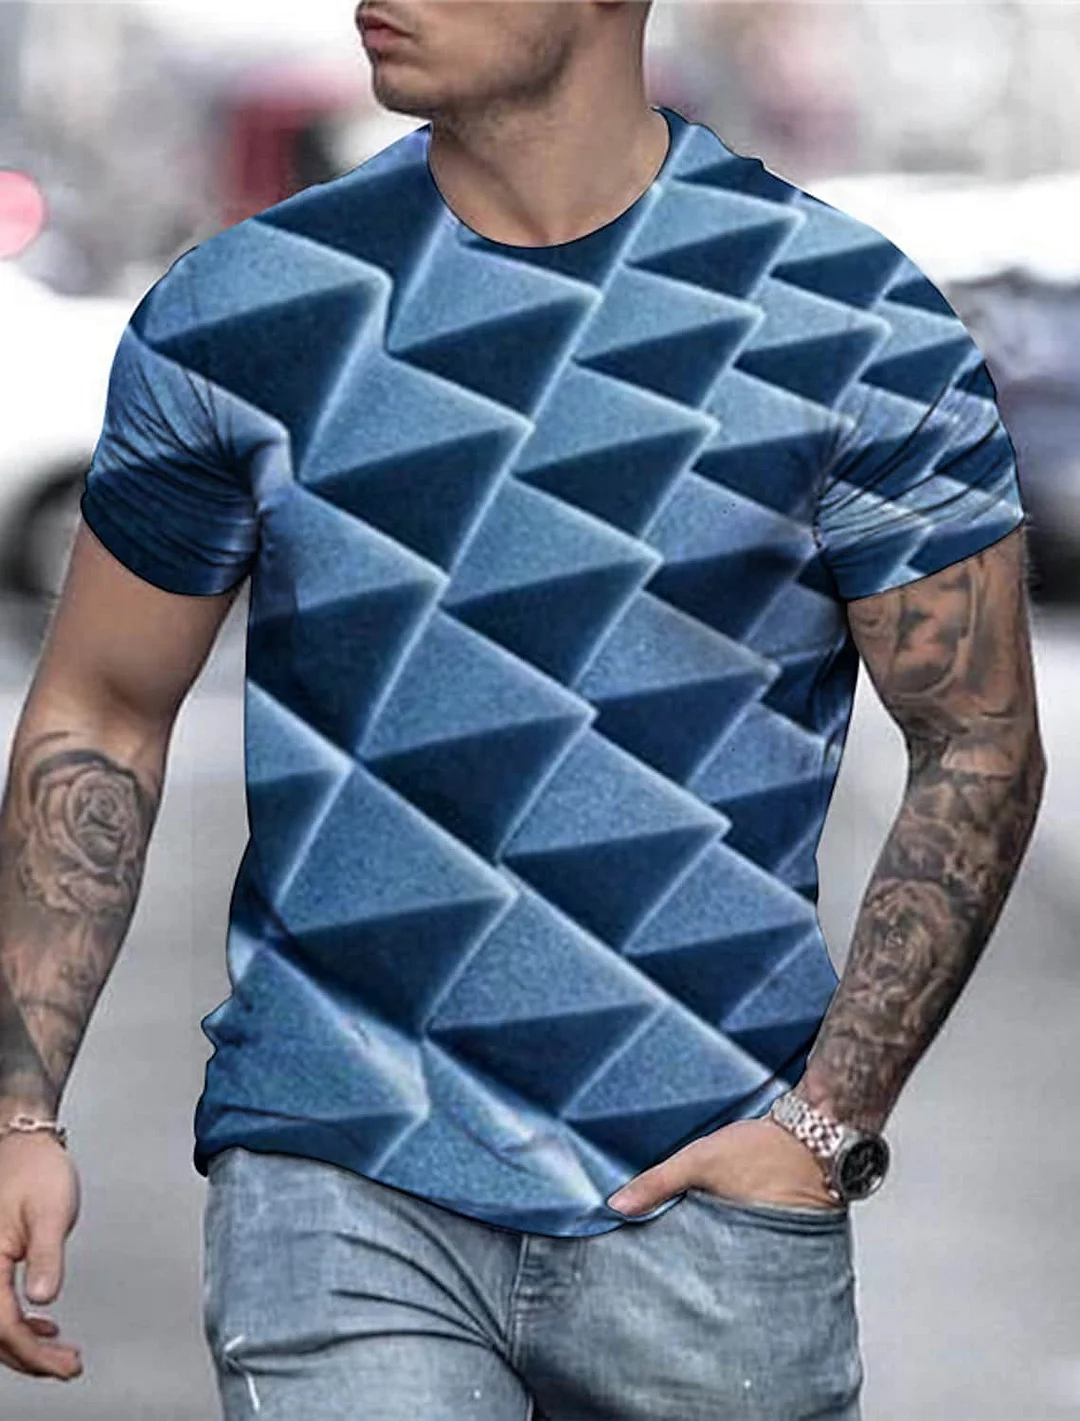 Men's Tee T shirt Shirt 3D Print Plaid Checkered Graphic 3D Short Sleeve Party Tops Basic Comfortable Big and Tall Round Neck